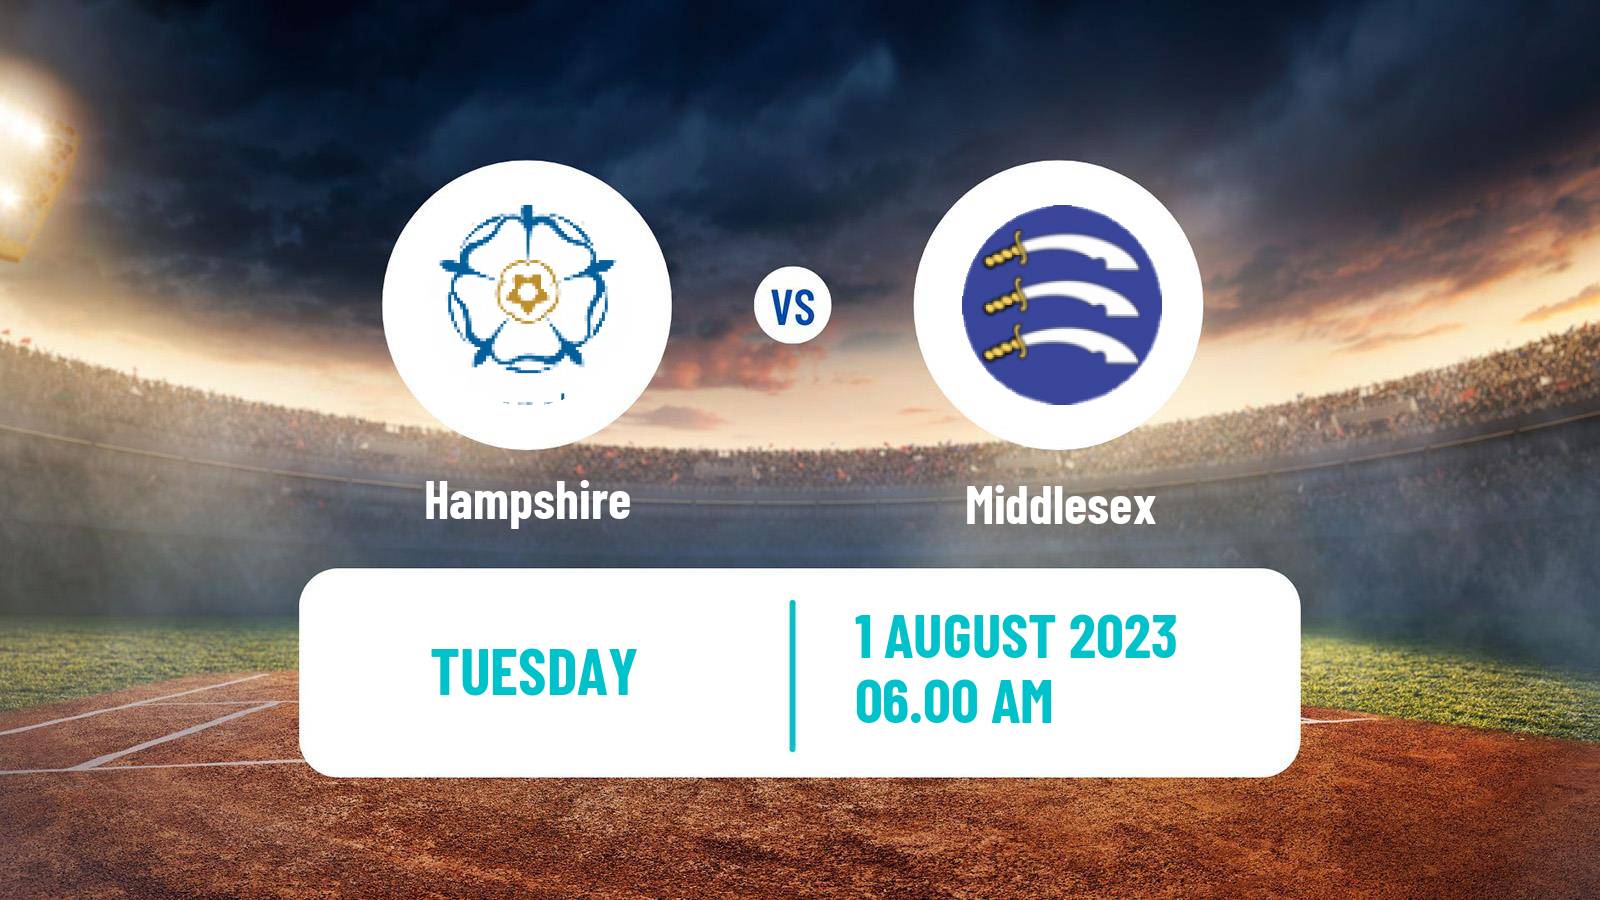 Cricket Royal London One-Day Cup Hampshire - Middlesex